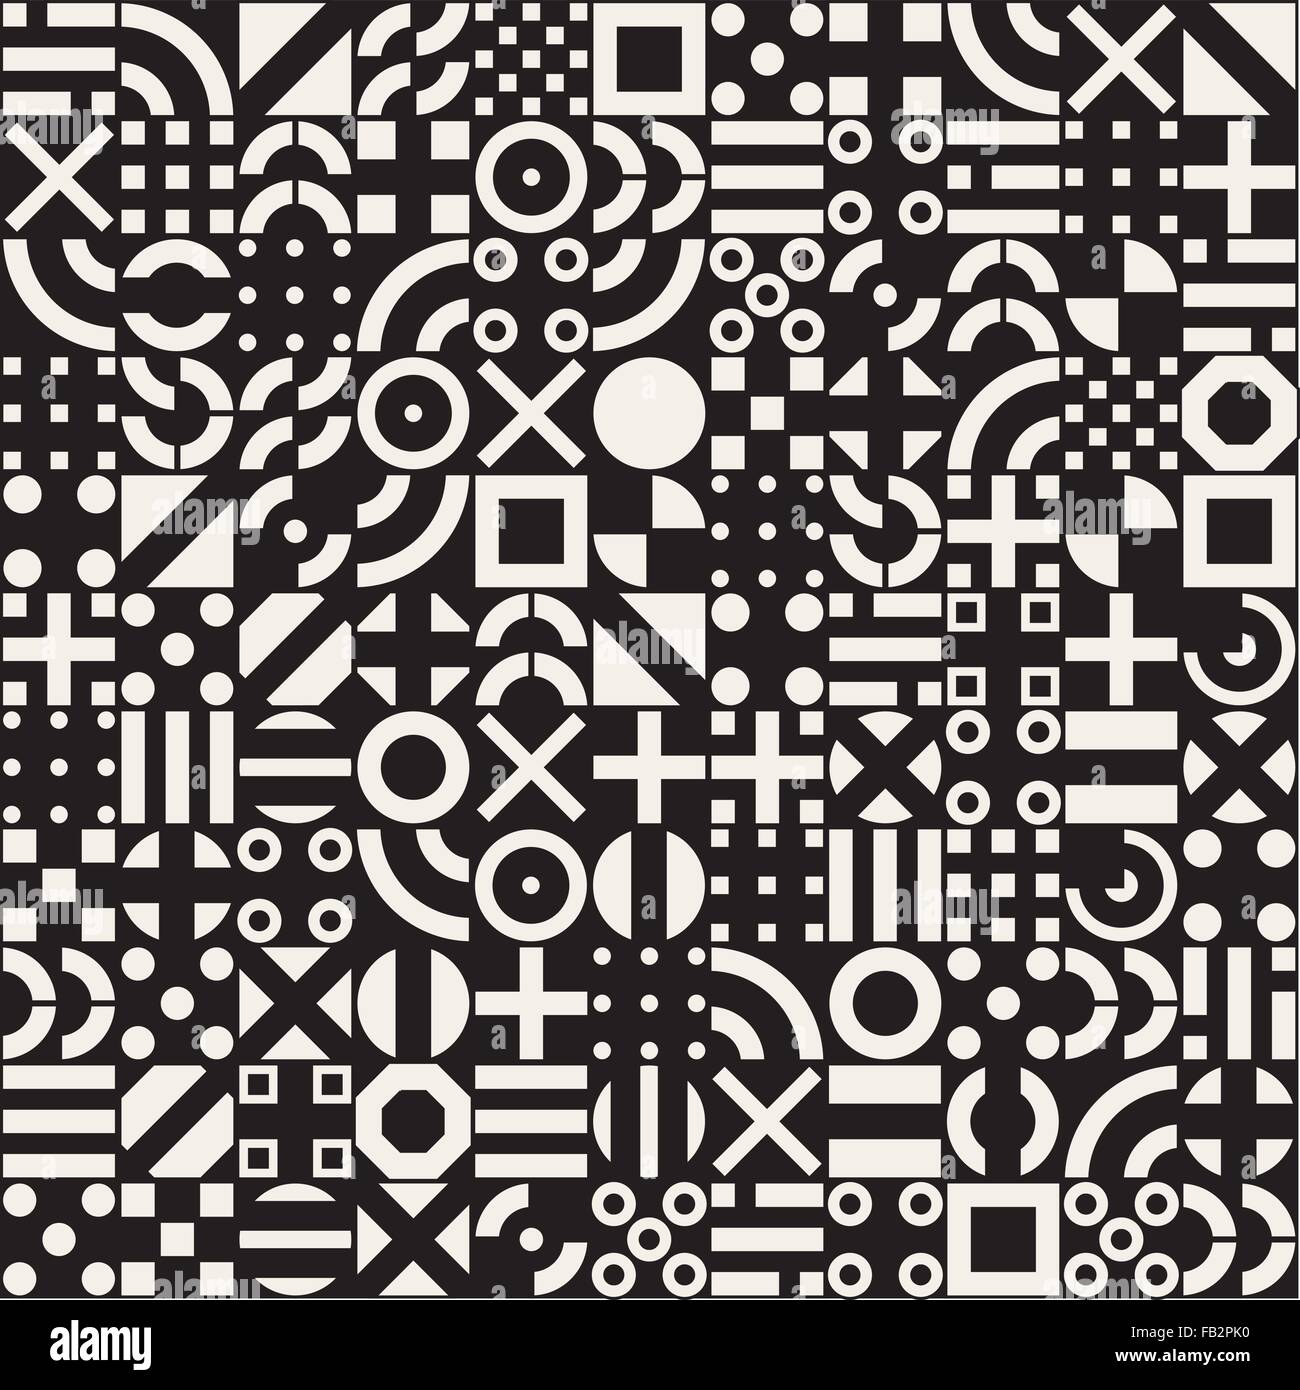 Square block seamless background pattern Vector Image